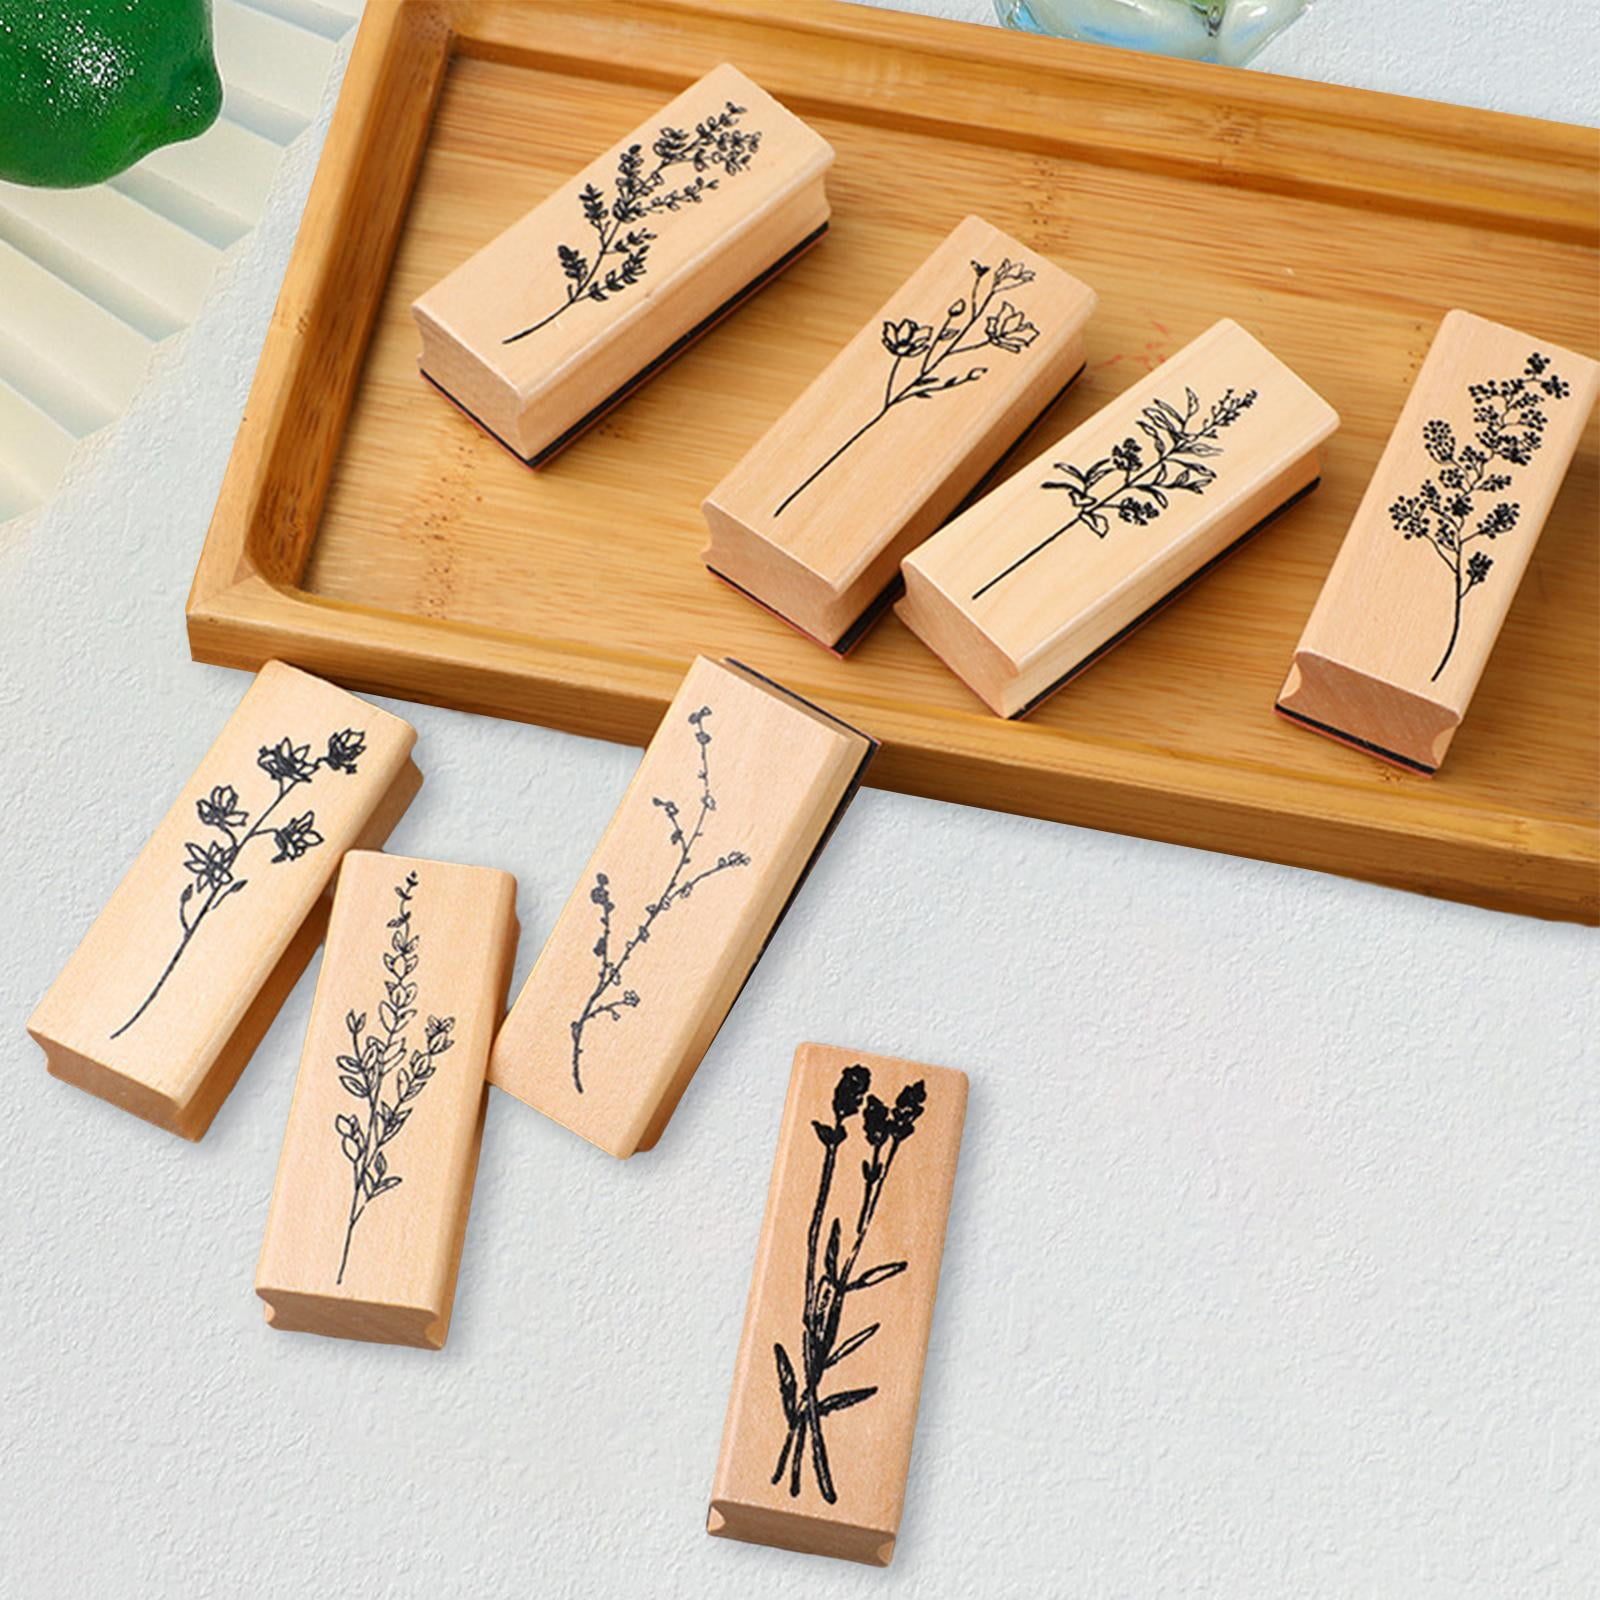 Hashcart Wooden Pottery Stamps for Block Printing - Stamp Set of 10 Wooden Clay Stamps Wood Printing Stamp for Crafting on Fabric, Blocks, Henna